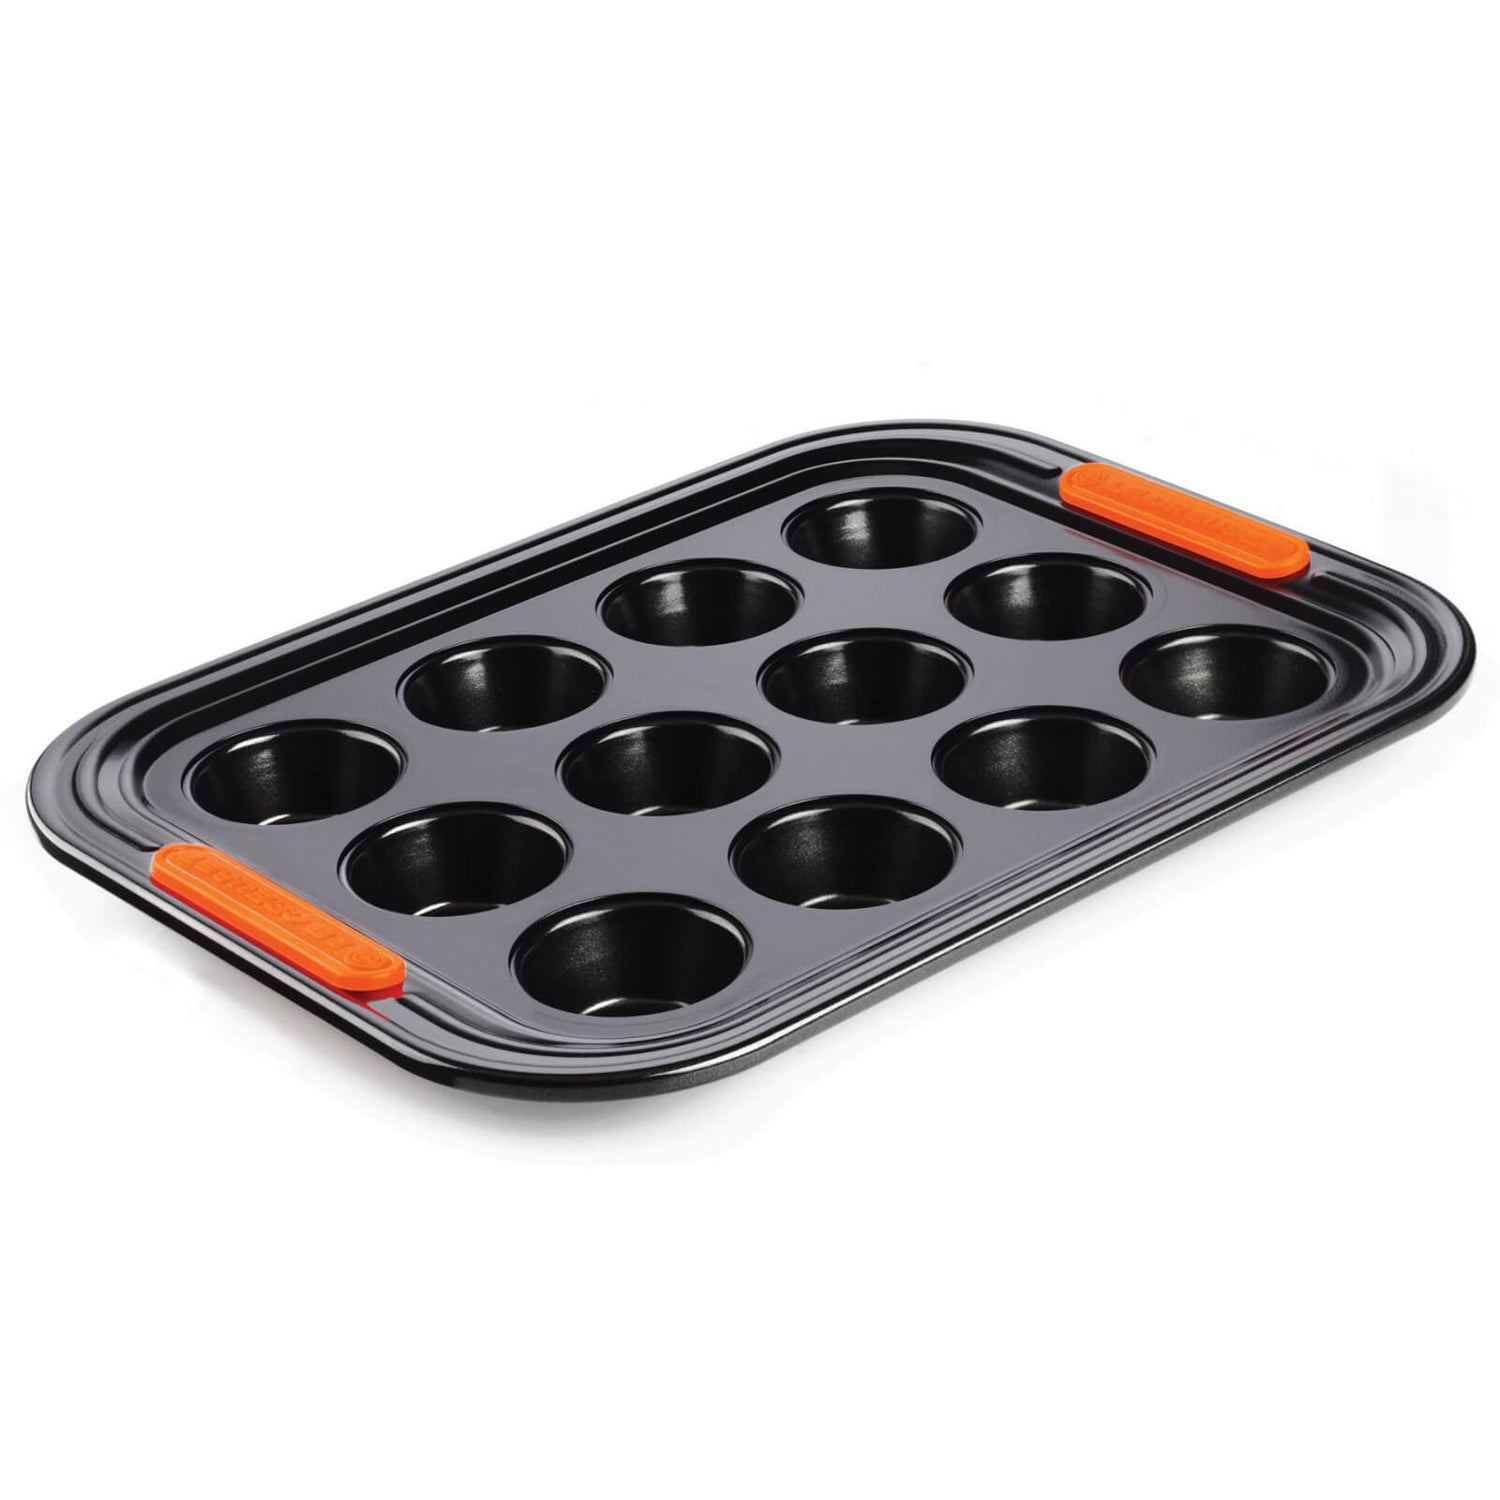 Le Creuset Bakeware Toughened Non Stick 12 Cup Muffin Tray